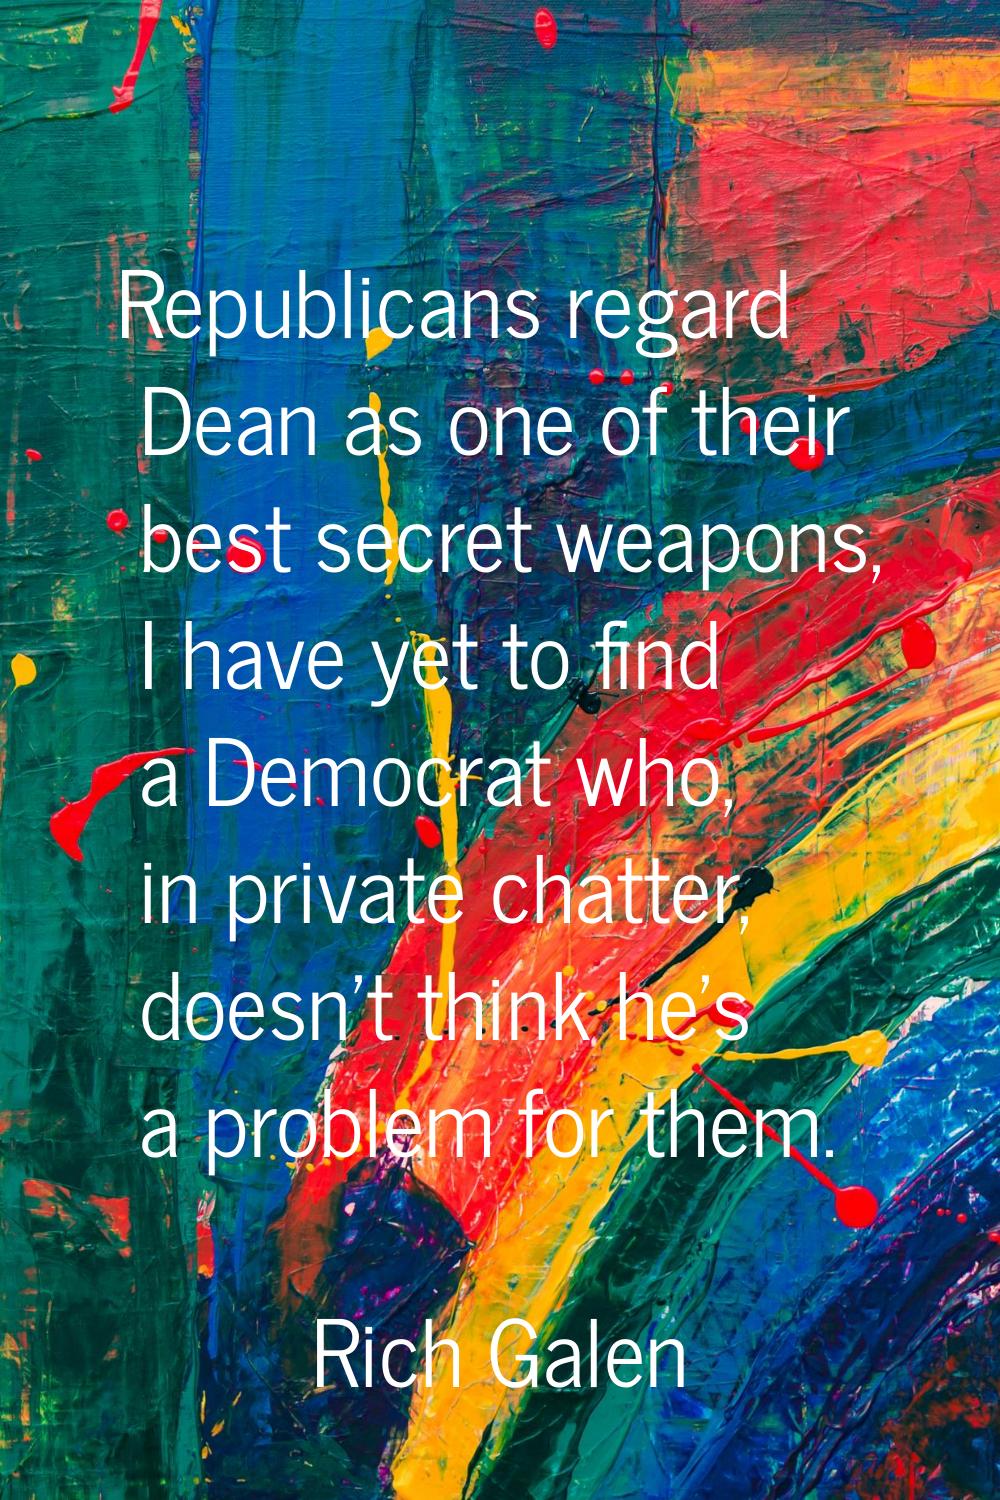 Republicans regard Dean as one of their best secret weapons, I have yet to find a Democrat who, in 